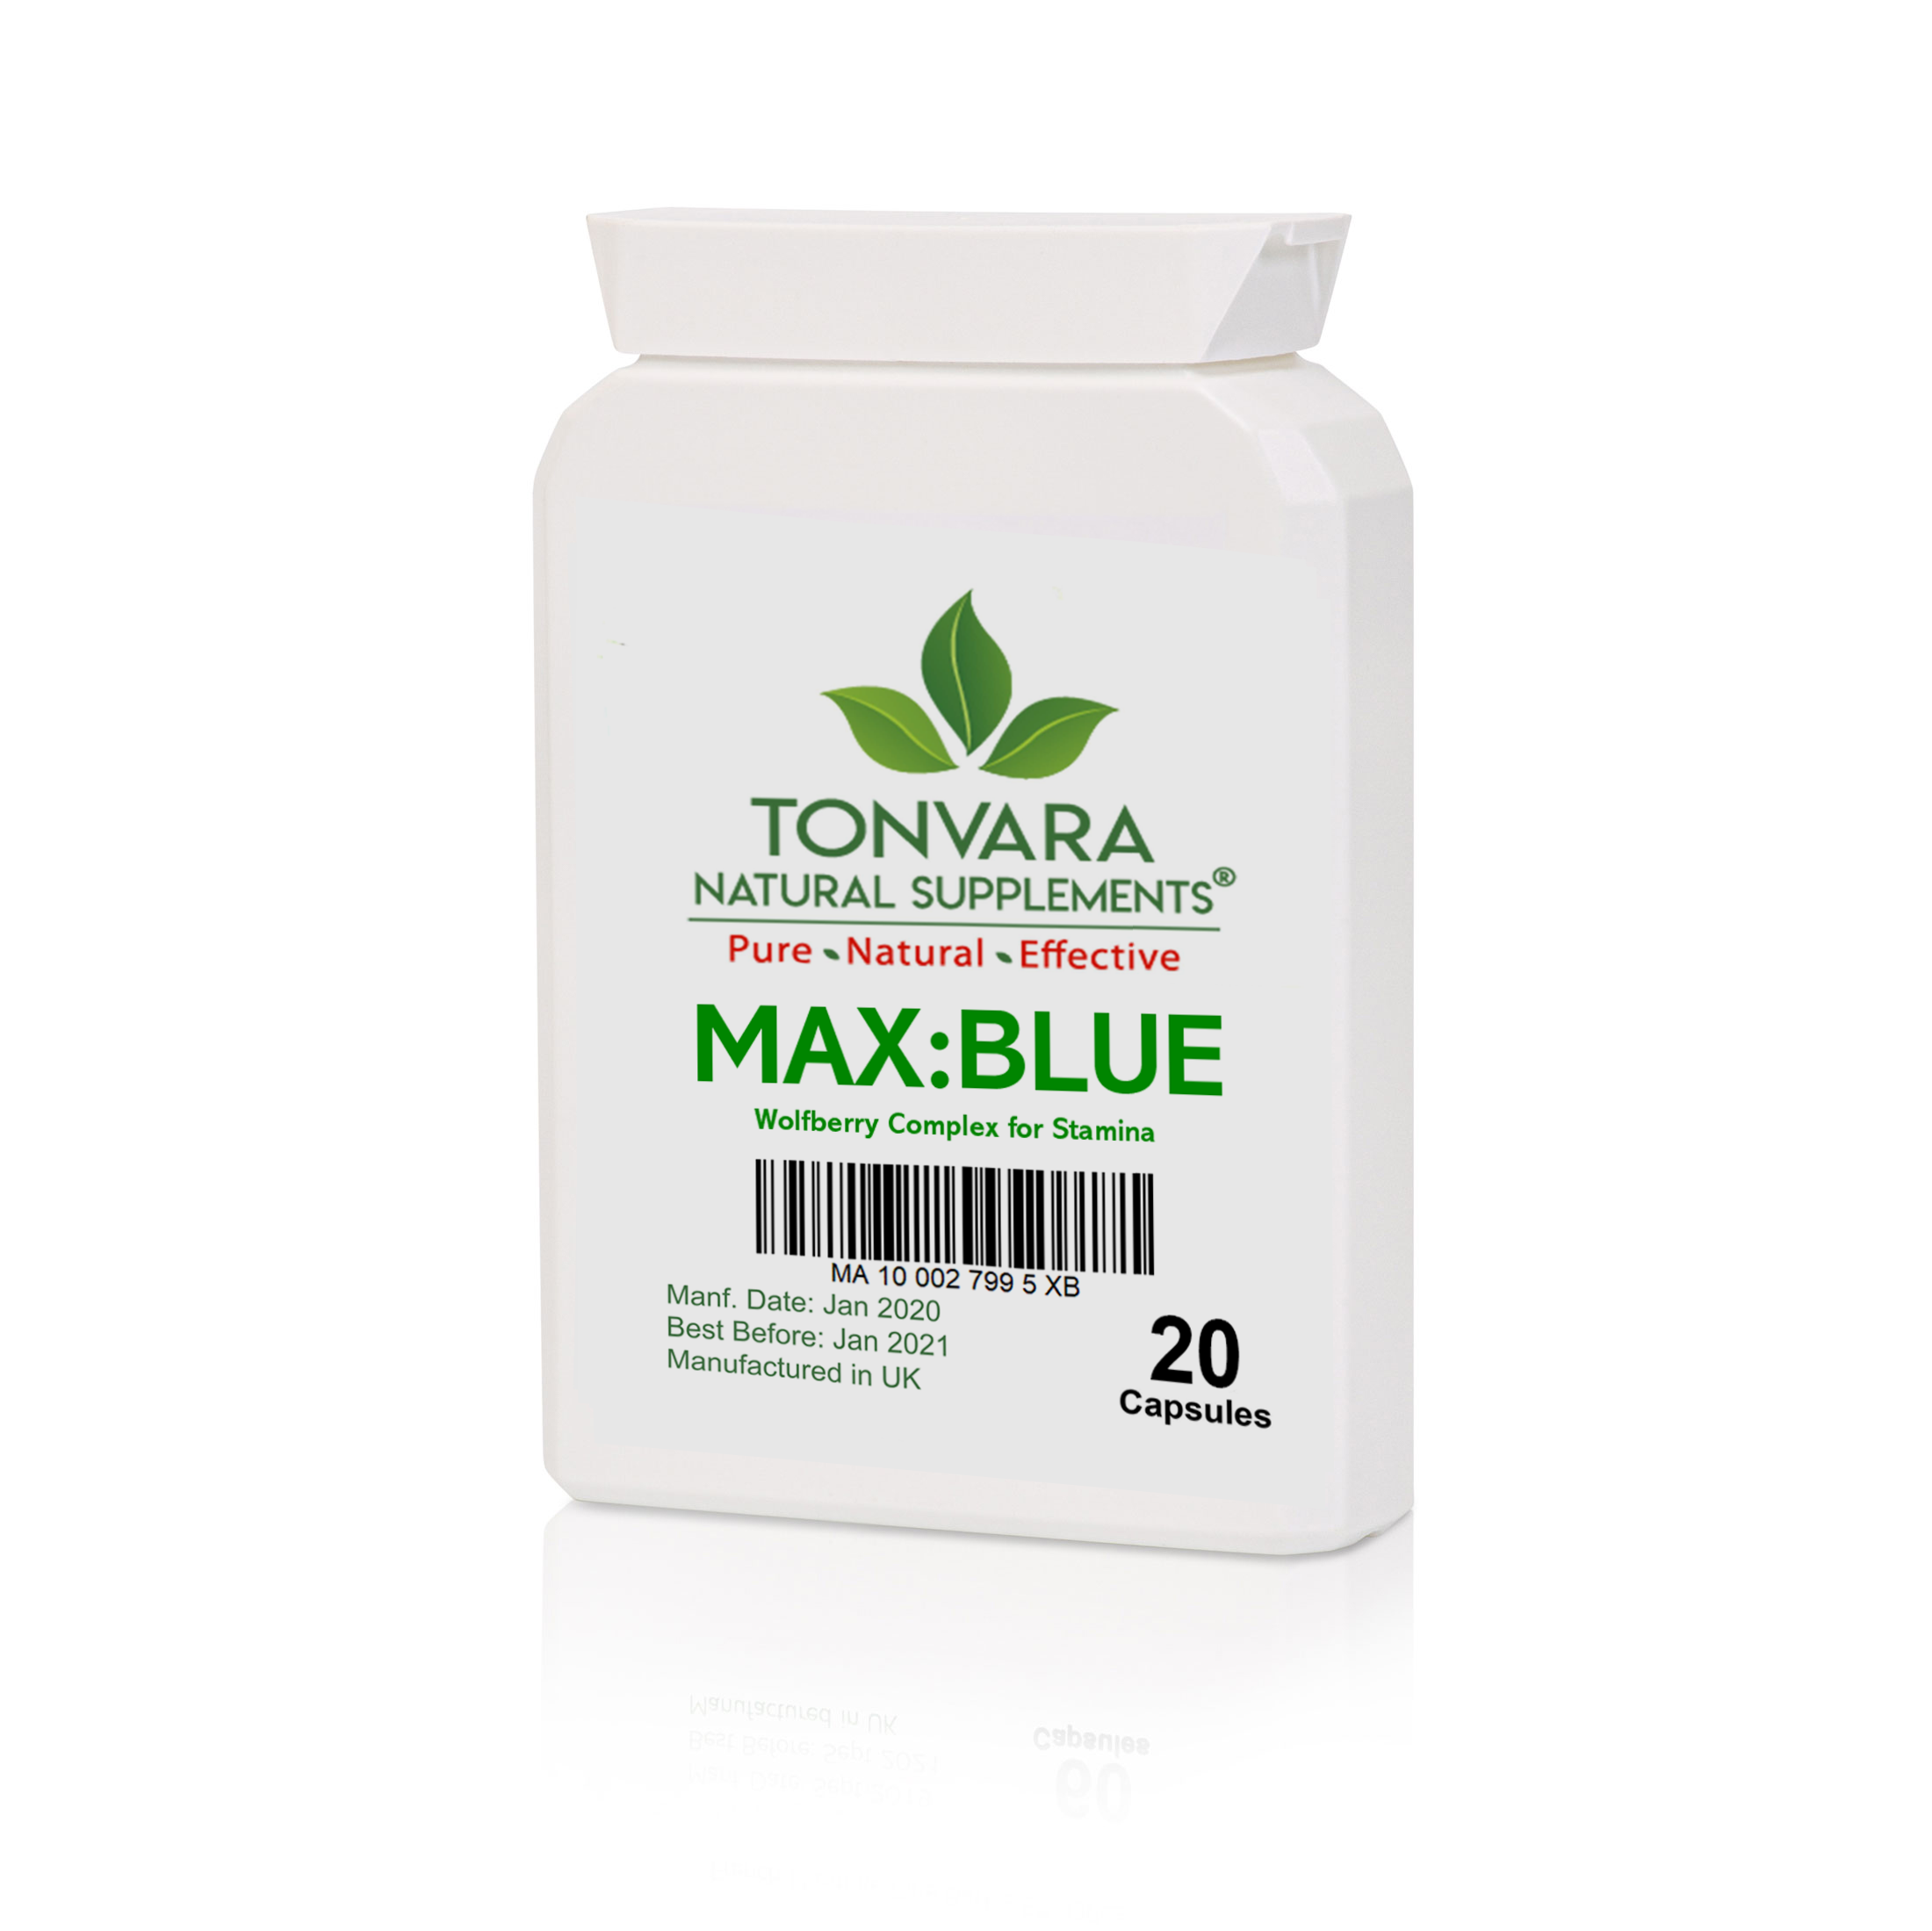 Tonvara MaxBlue Natural Sex Enhancer for Men - Now Ships In Letterbox Friendly Flat Postal Bottles With Discreet Labelling